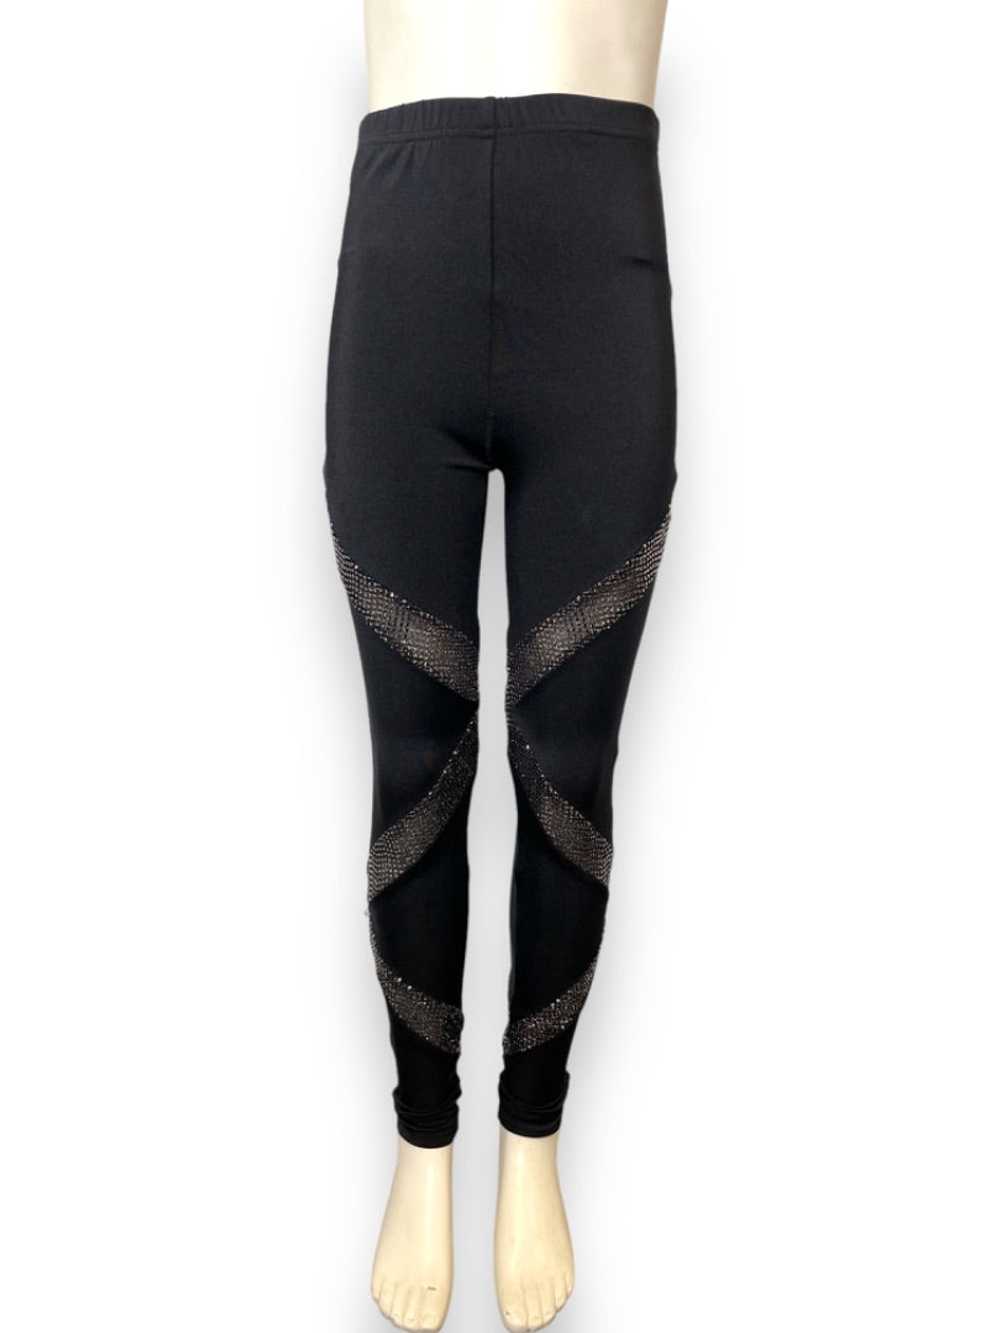 Dance costume - LOSE MY BREATH-Leggings Only - image 1